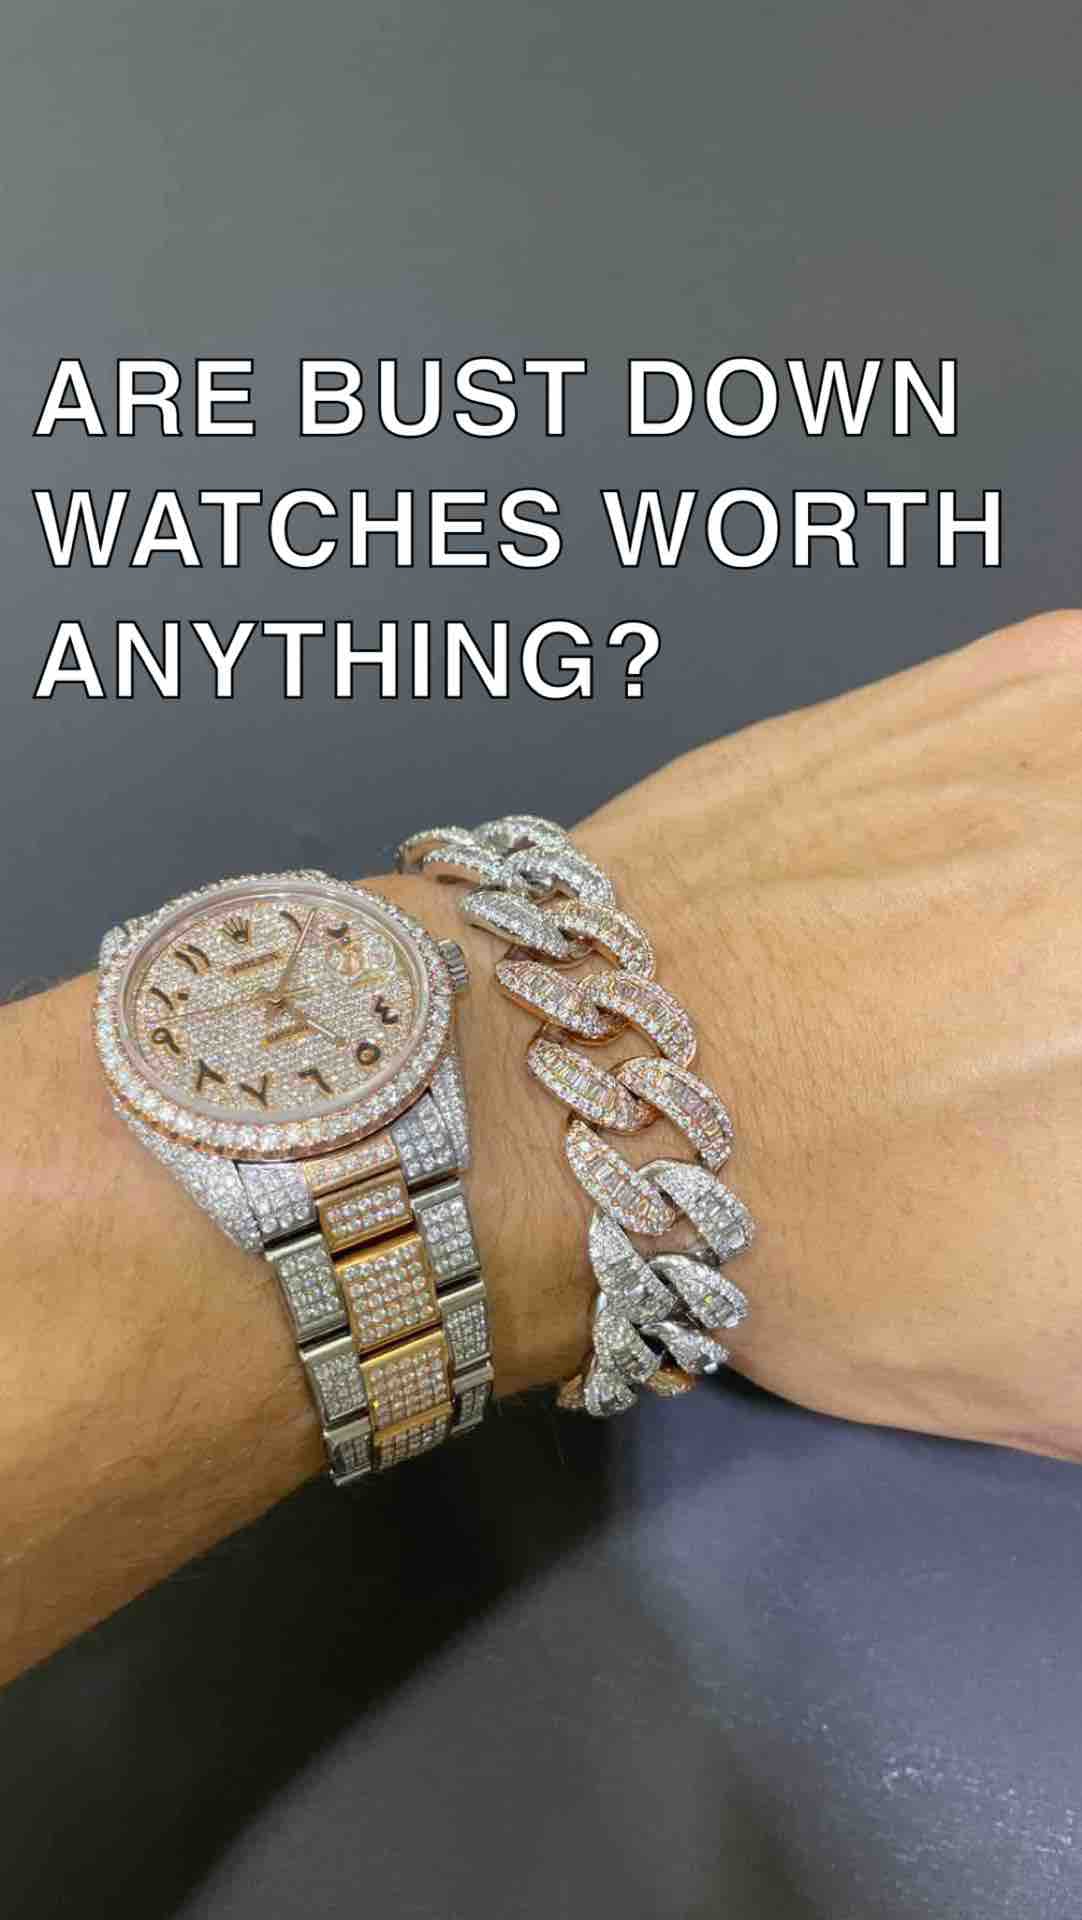 Are bust down watches worth anything?